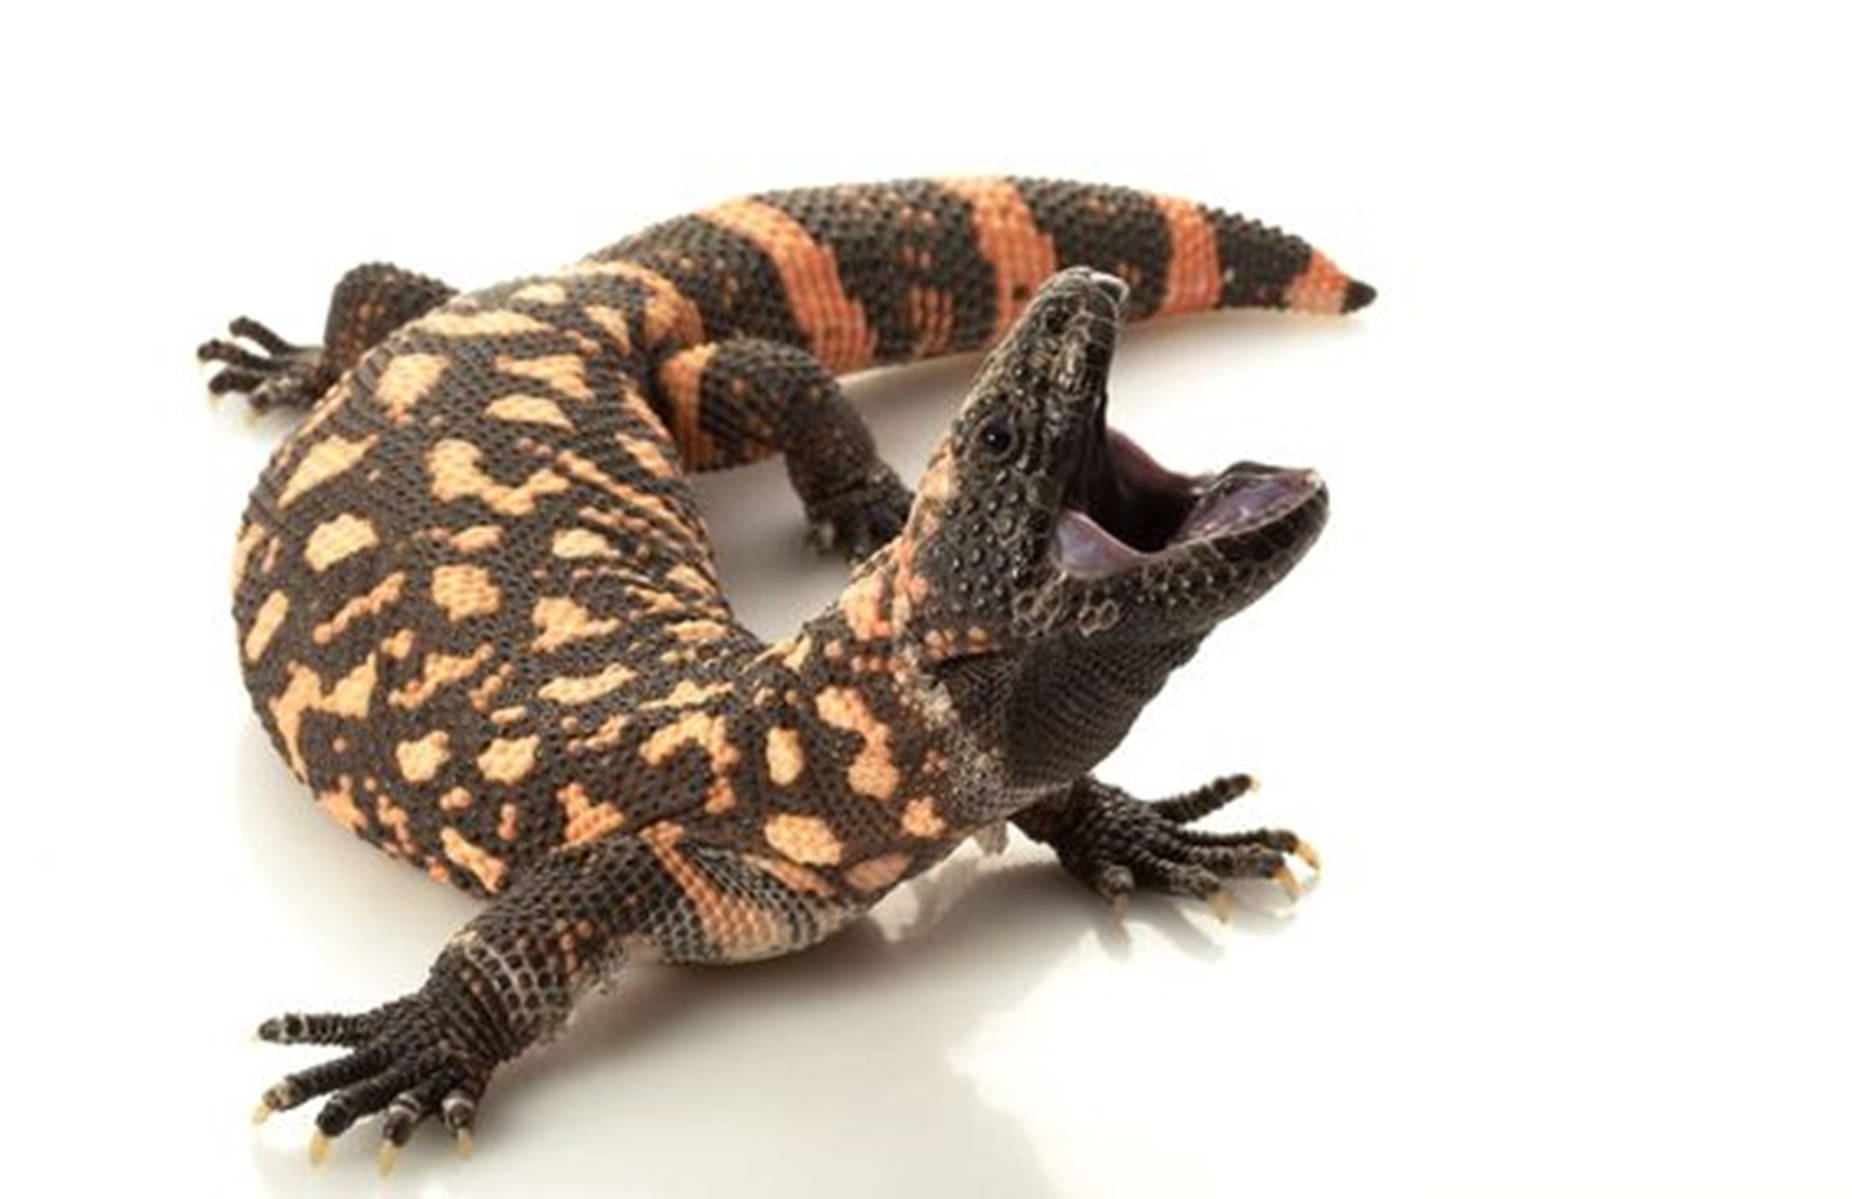 A striking view of a Gila Monster showcasing its open mouth Wallpaper